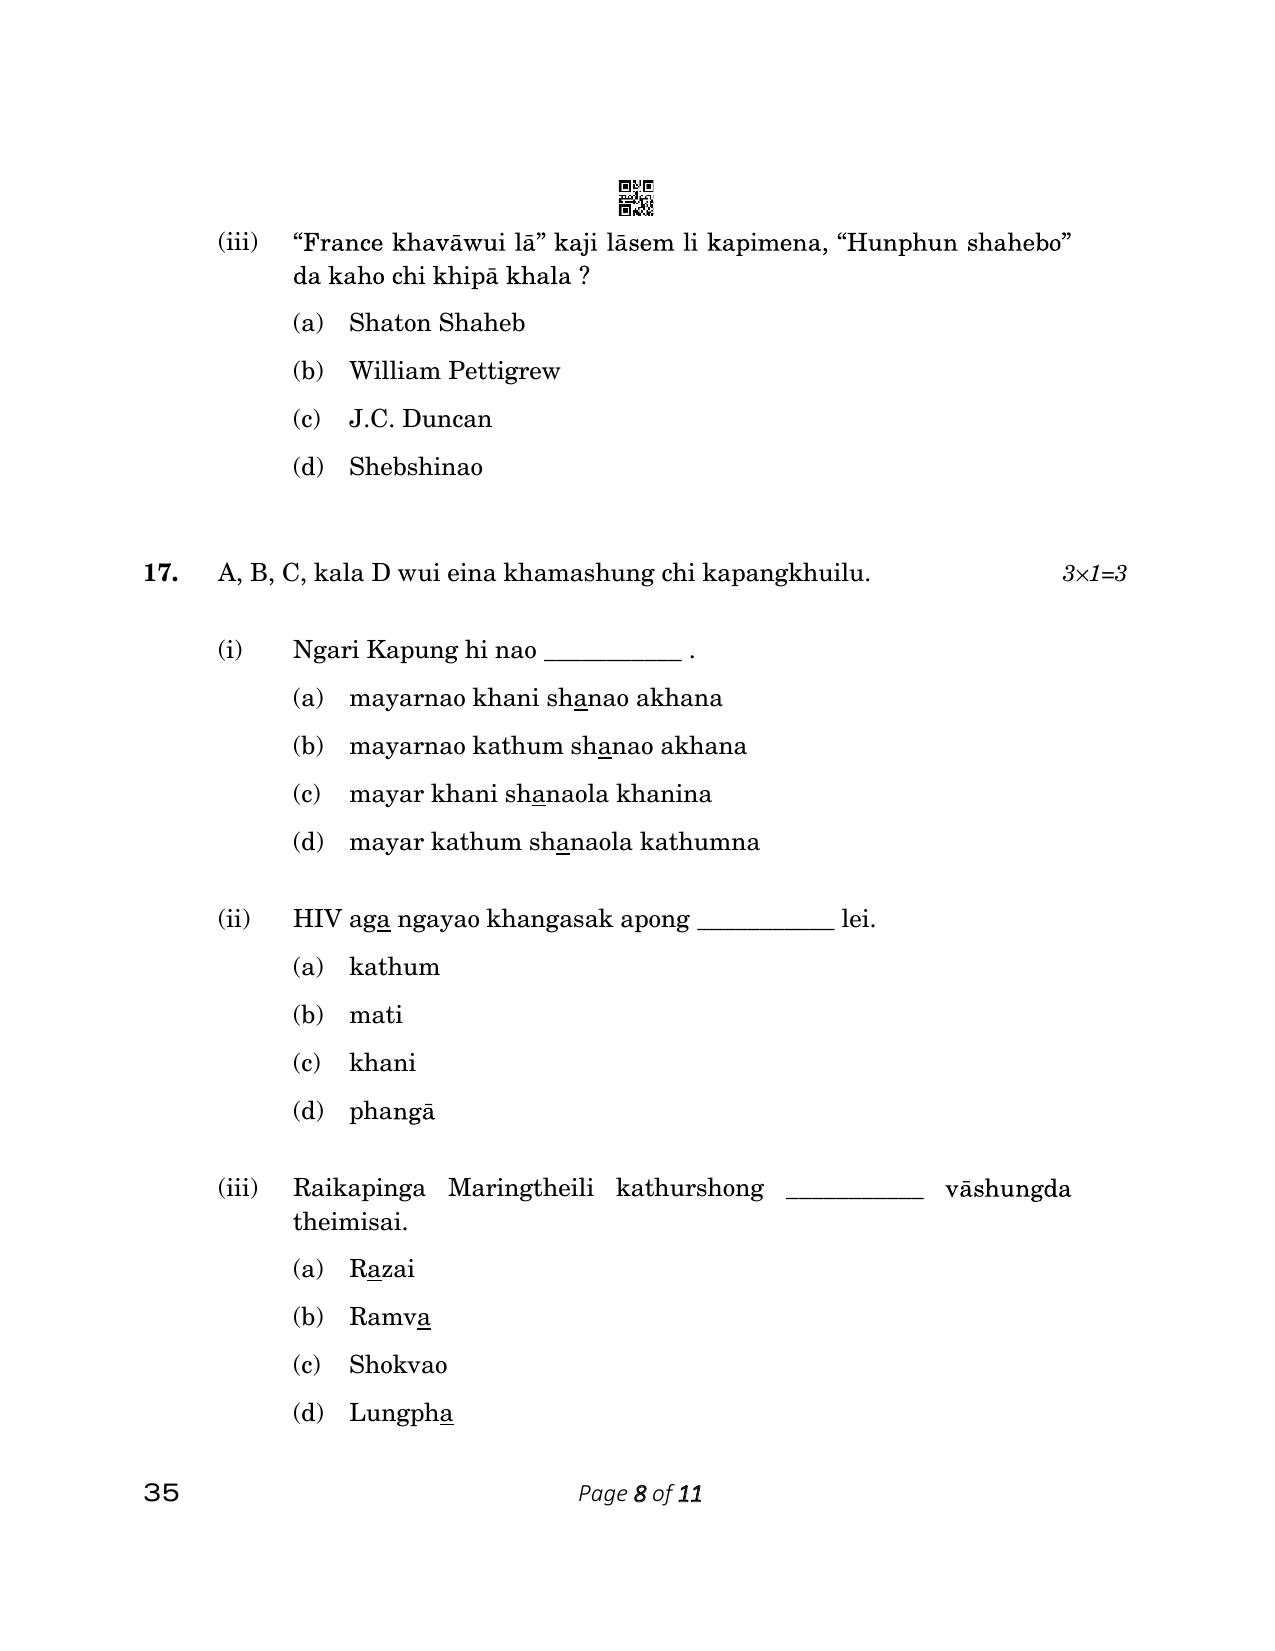 CBSE Class 12 35_Tangkhul 2023 Question Paper - Page 8